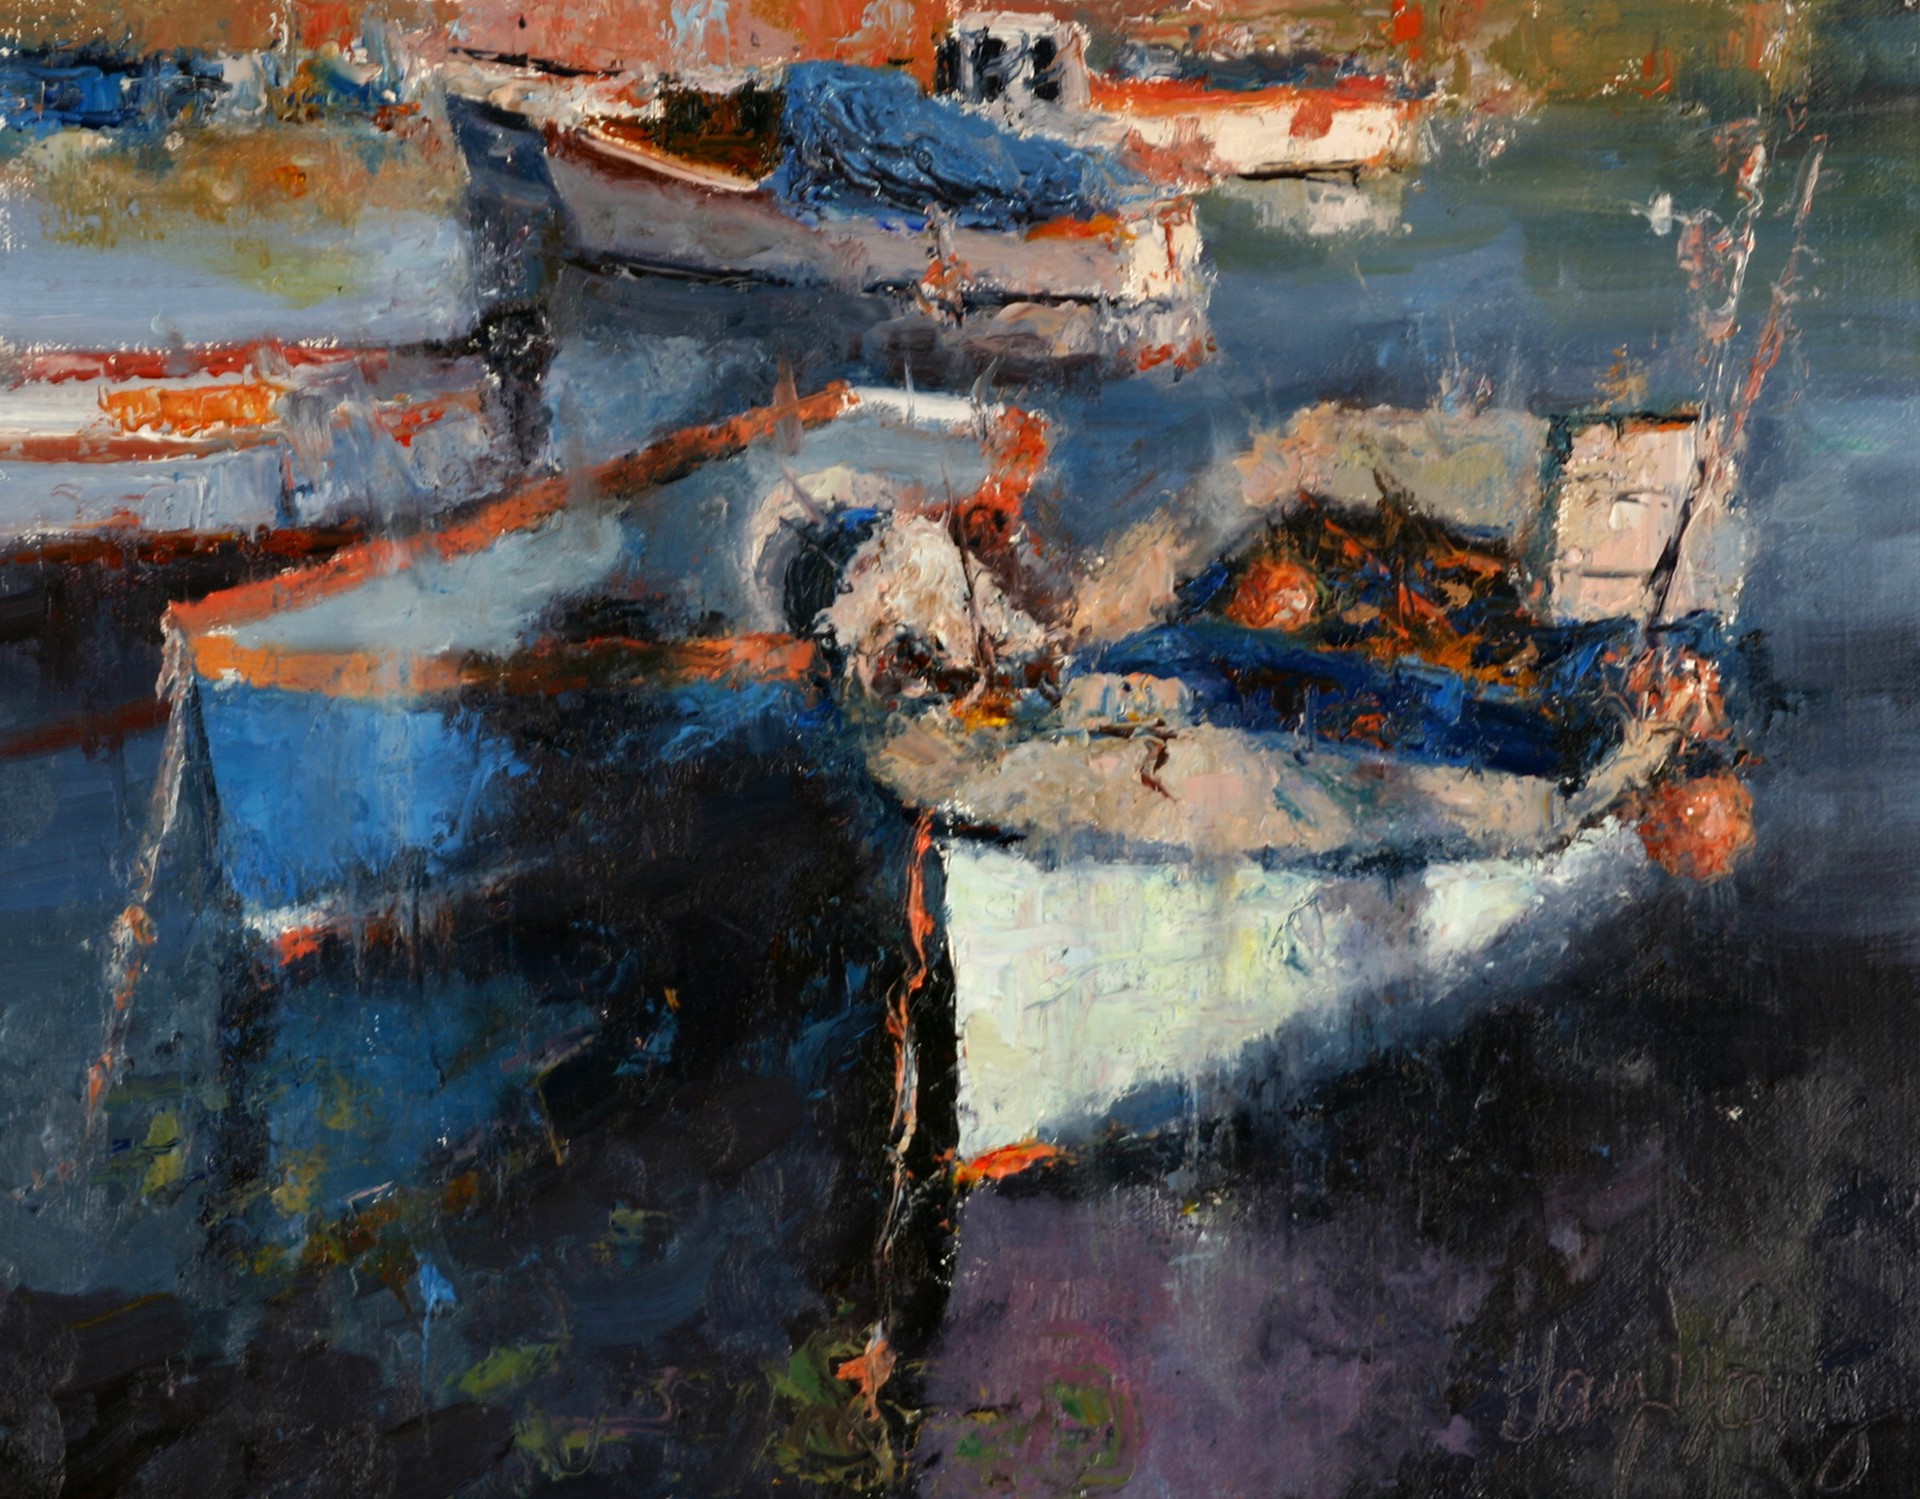 Mevagissey Harbor Study by Gary J. Young